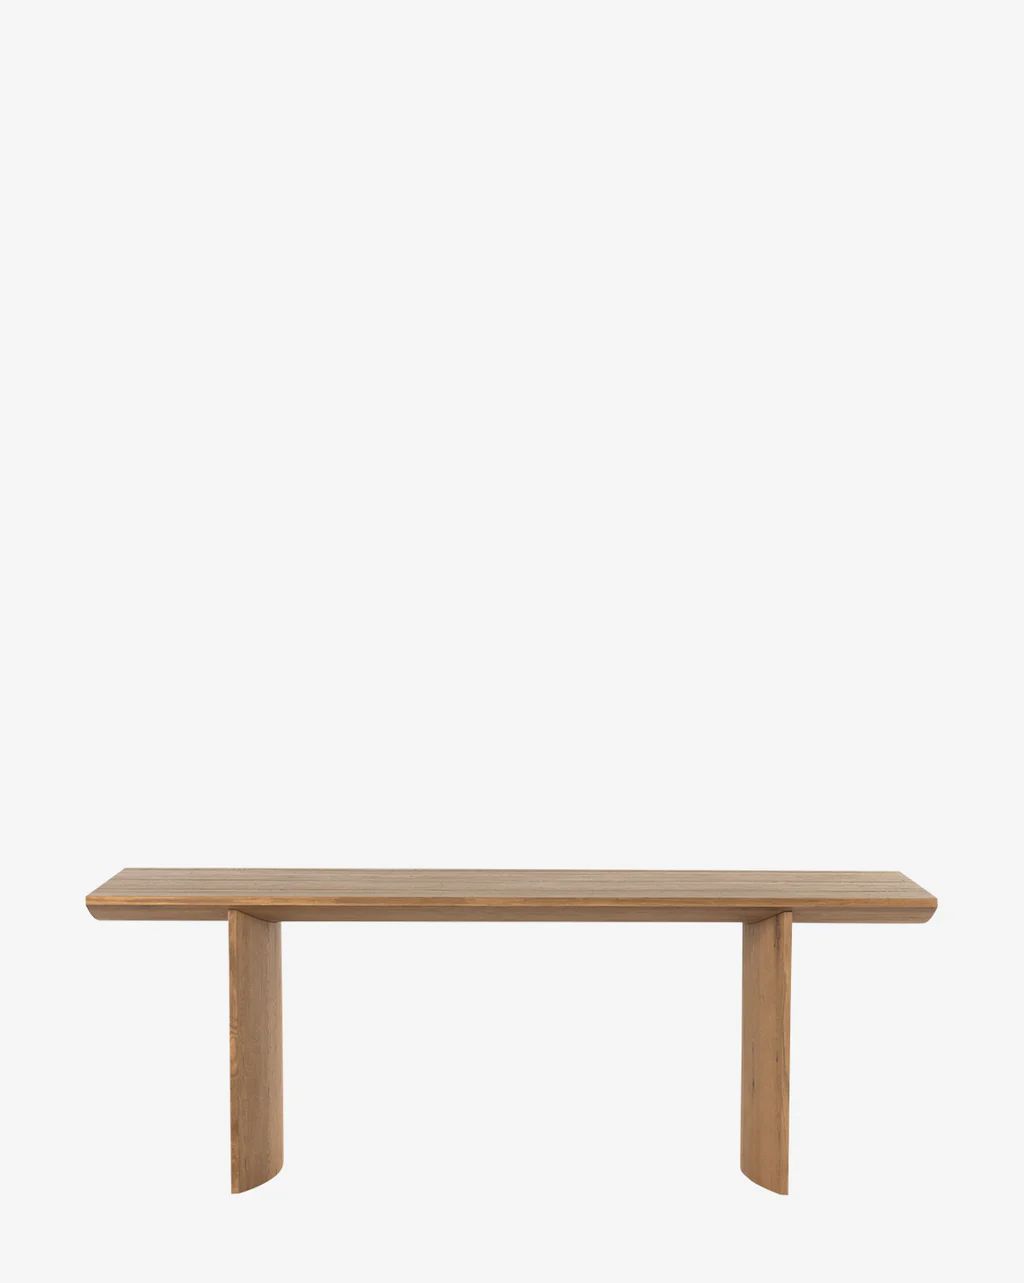 Wiley Dining Table | McGee & Co.